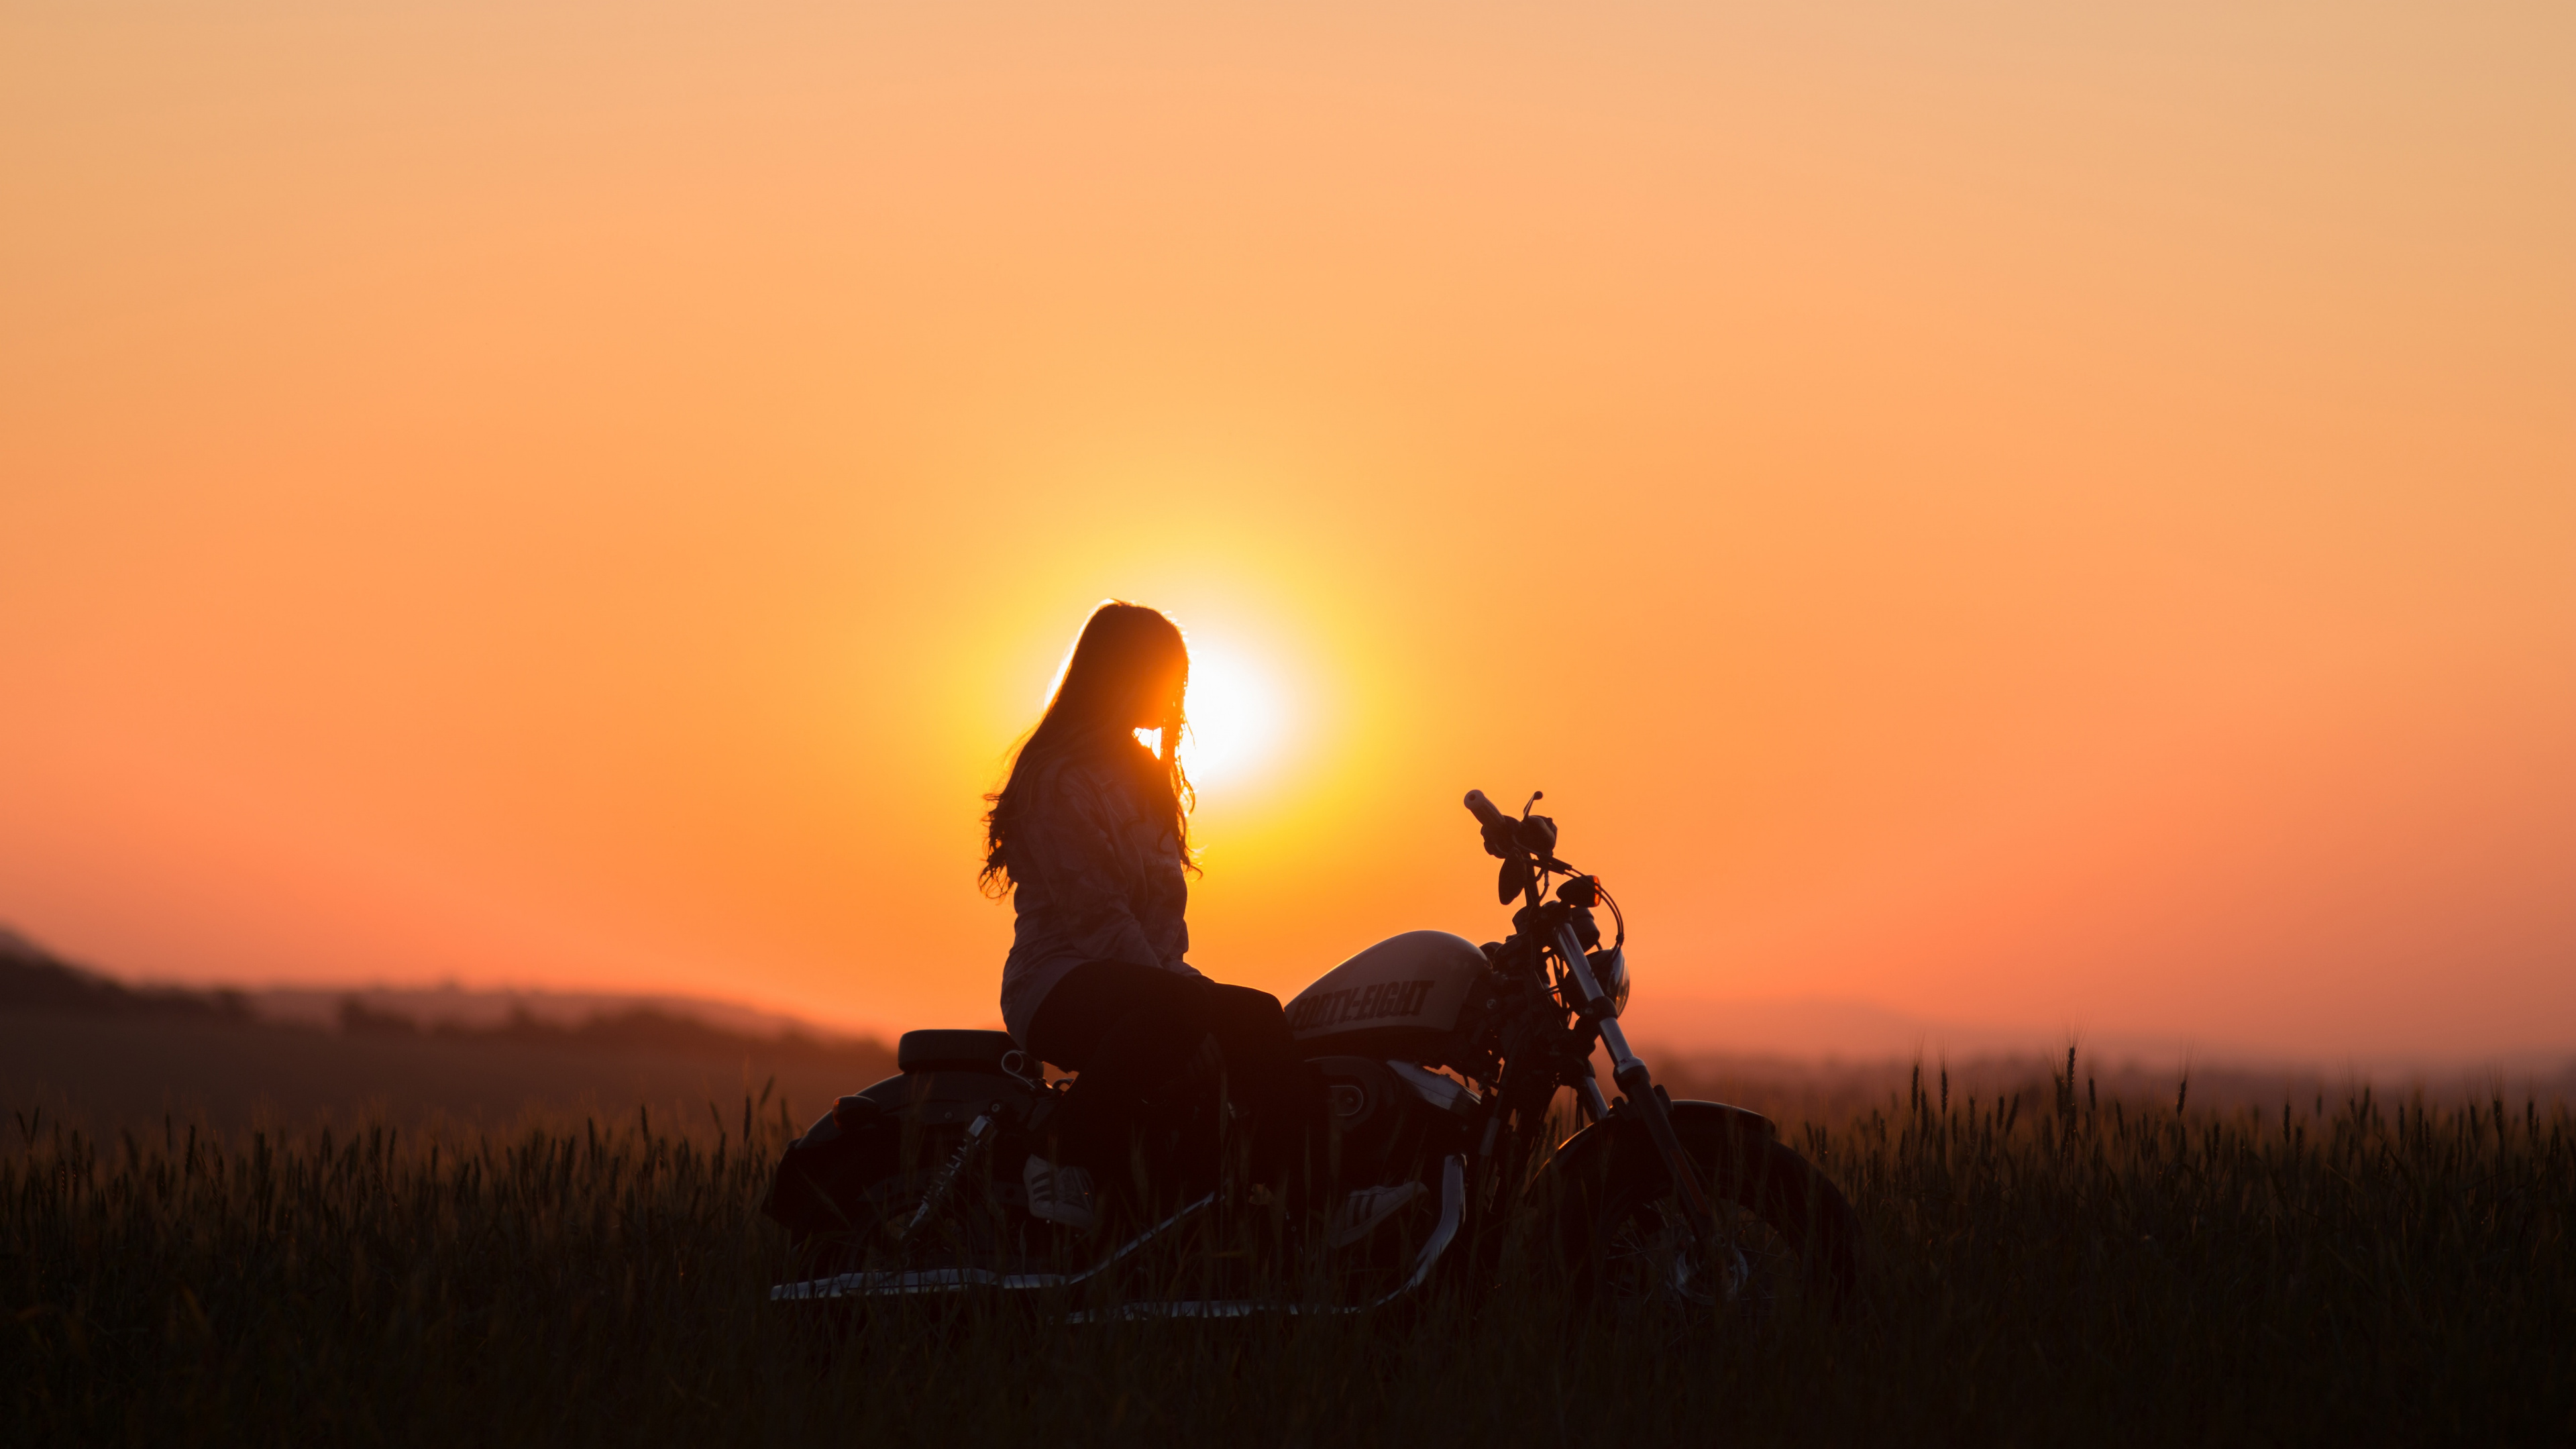 Silhouette of Man Riding Motorcycle During Sunset. Wallpaper in 3840x2160 Resolution